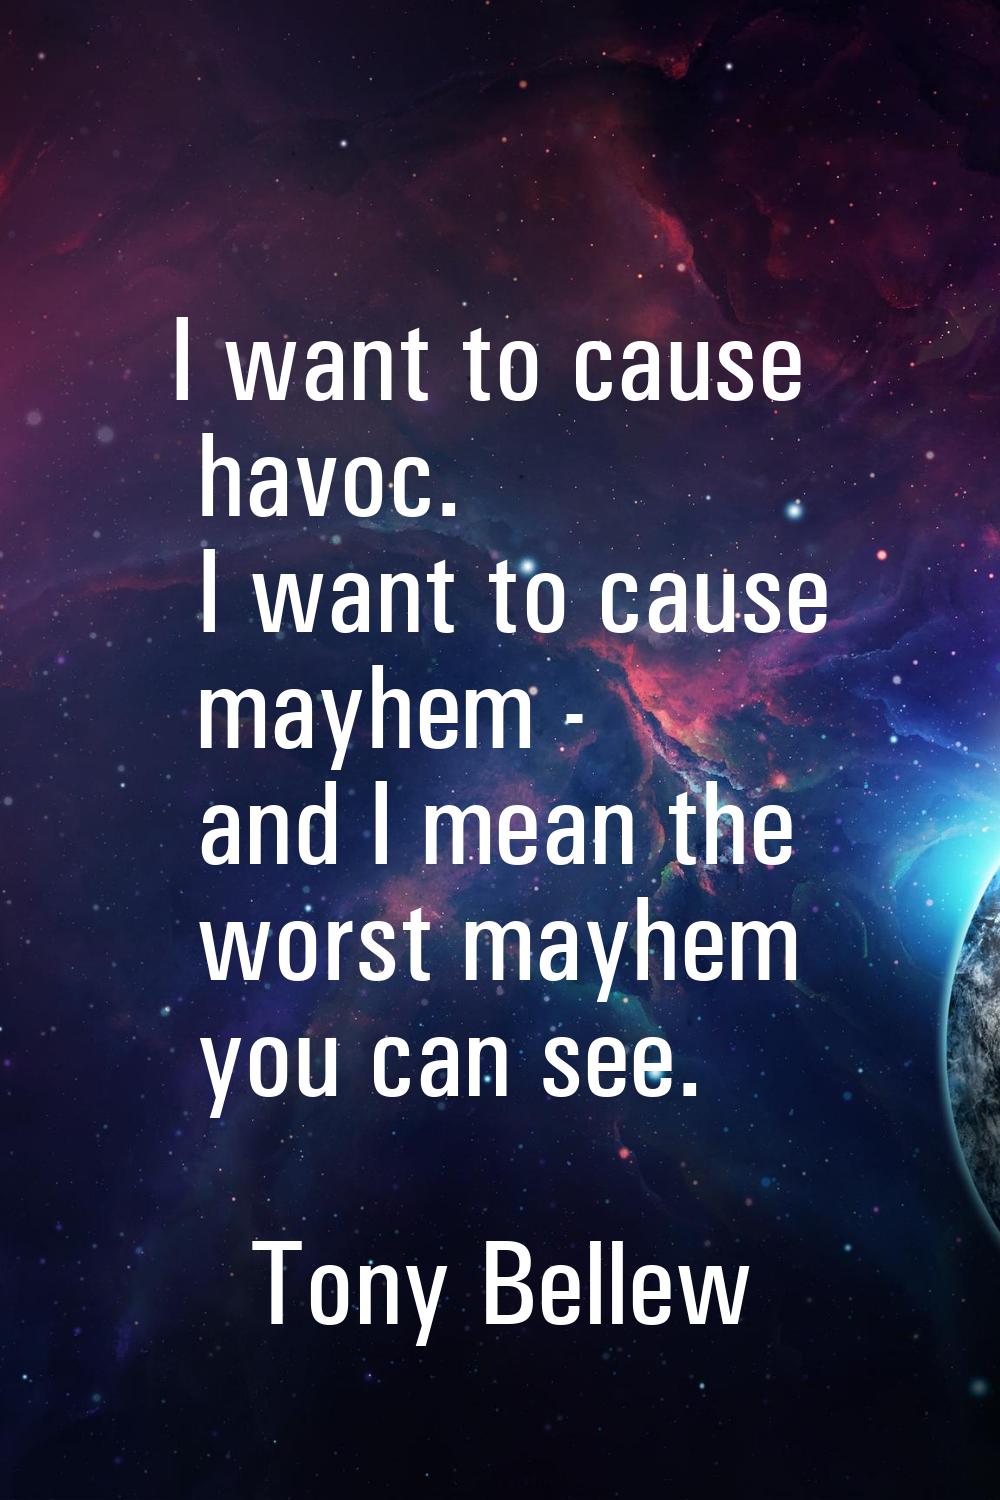 I want to cause havoc. I want to cause mayhem - and I mean the worst mayhem you can see.